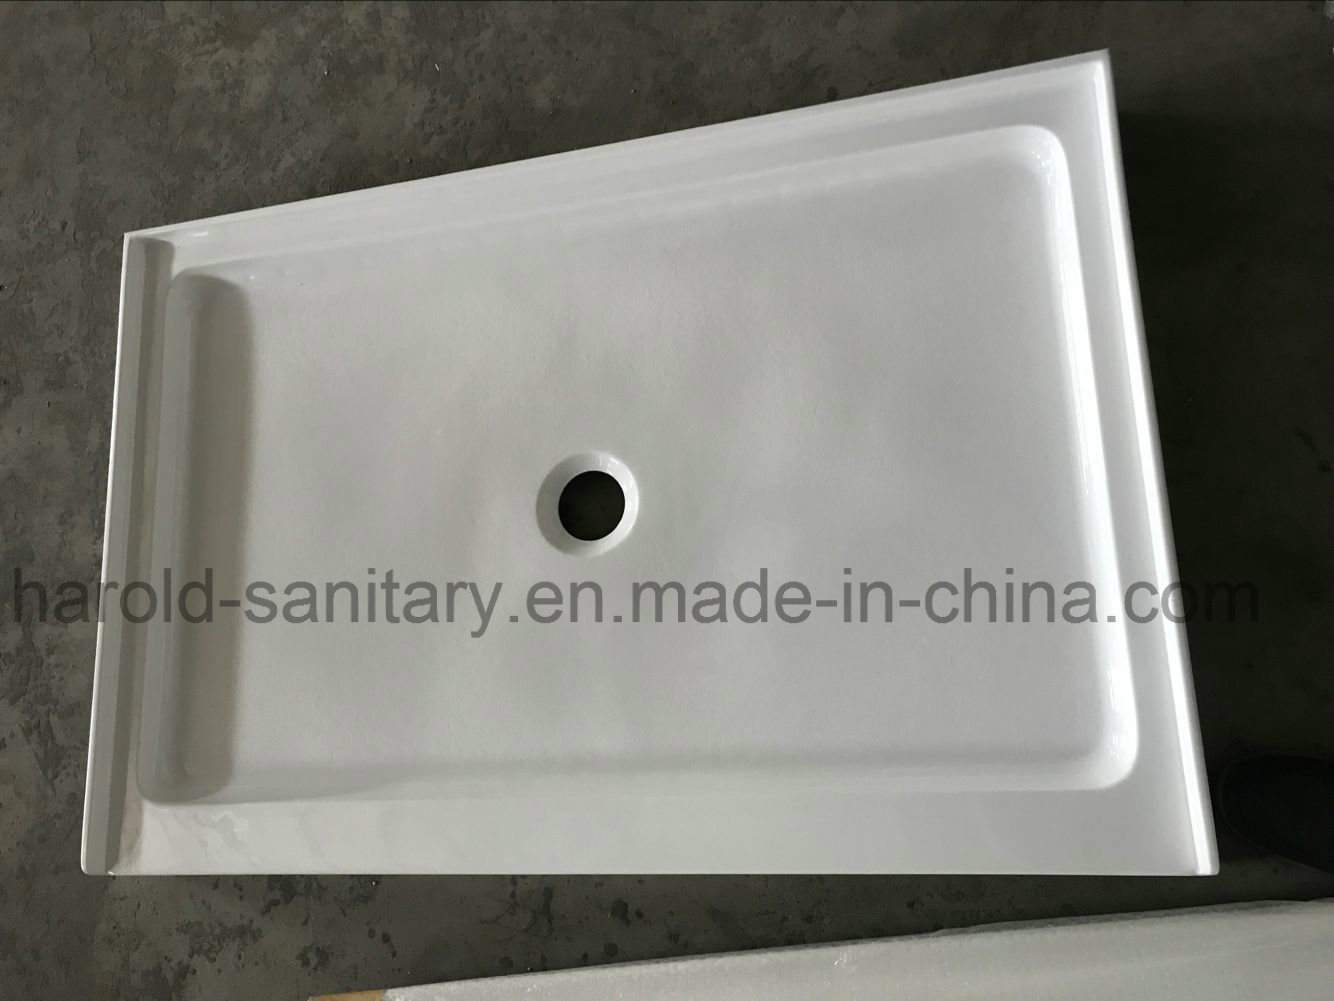 Cupc Acrylic Shower Tray with Round Drain in Center